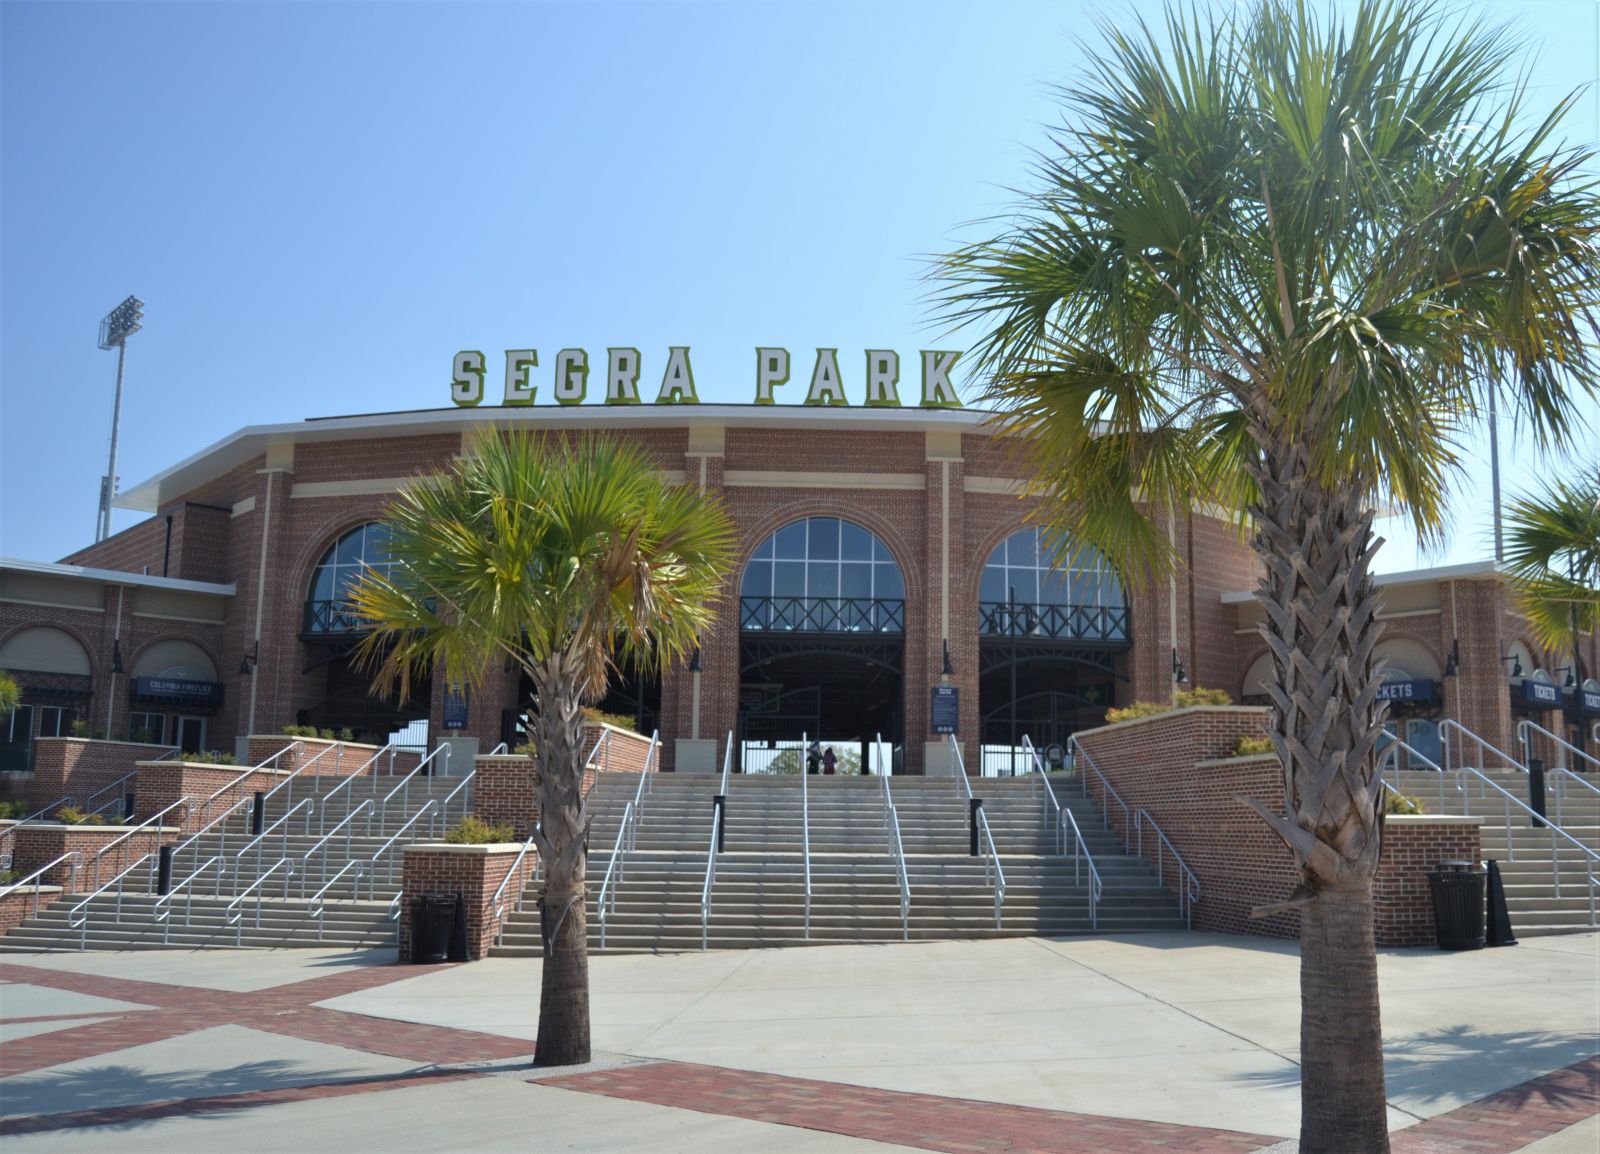 Segra Park, home of the Columbia Fireflies, has been named Class A Ballpark of the Decade by Ballpark Digest. (Photo/Melinda Waldrop)